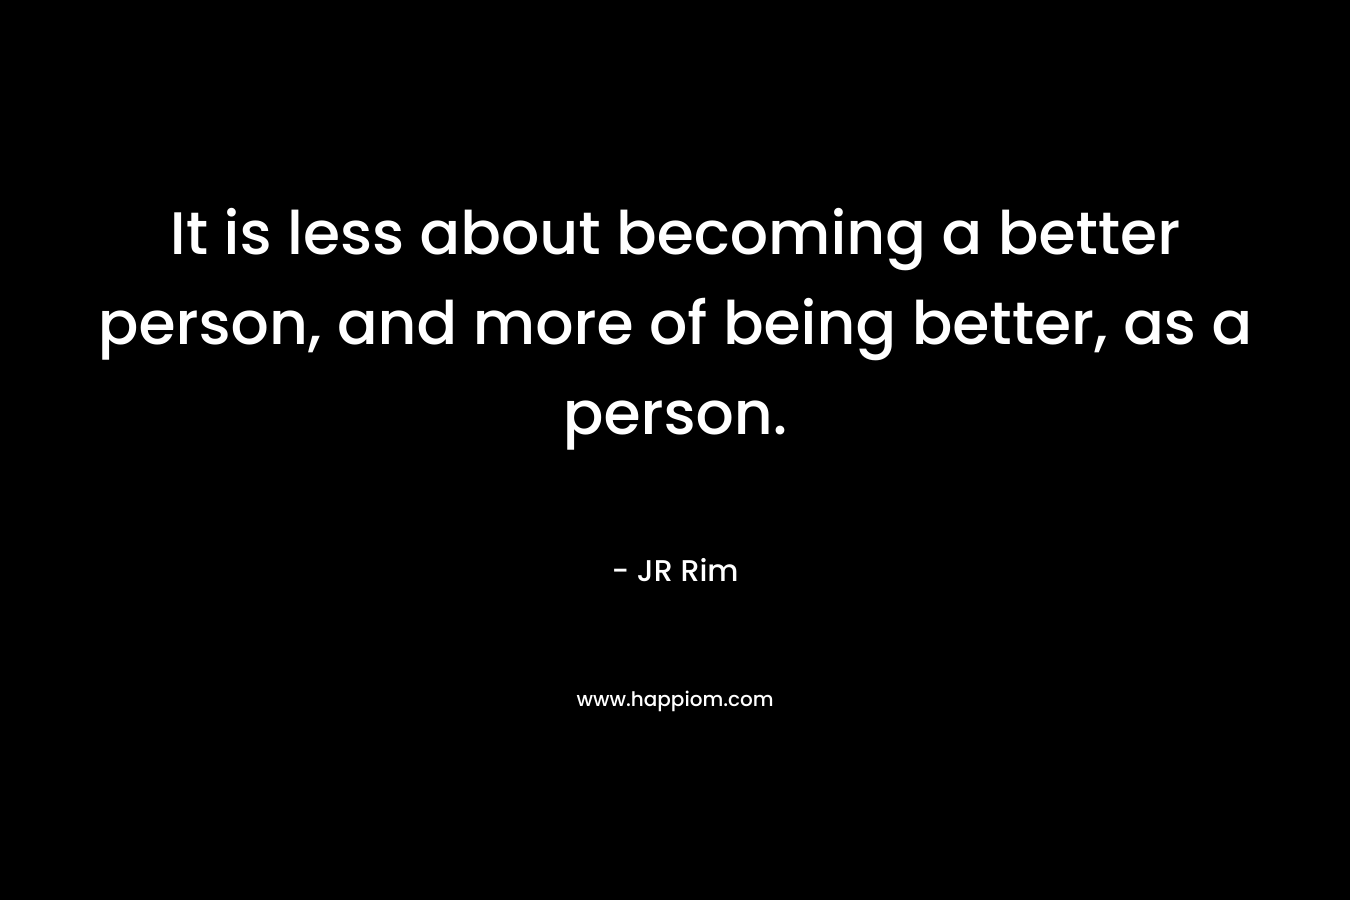 It is less about becoming a better person, and more of being better, as a person.